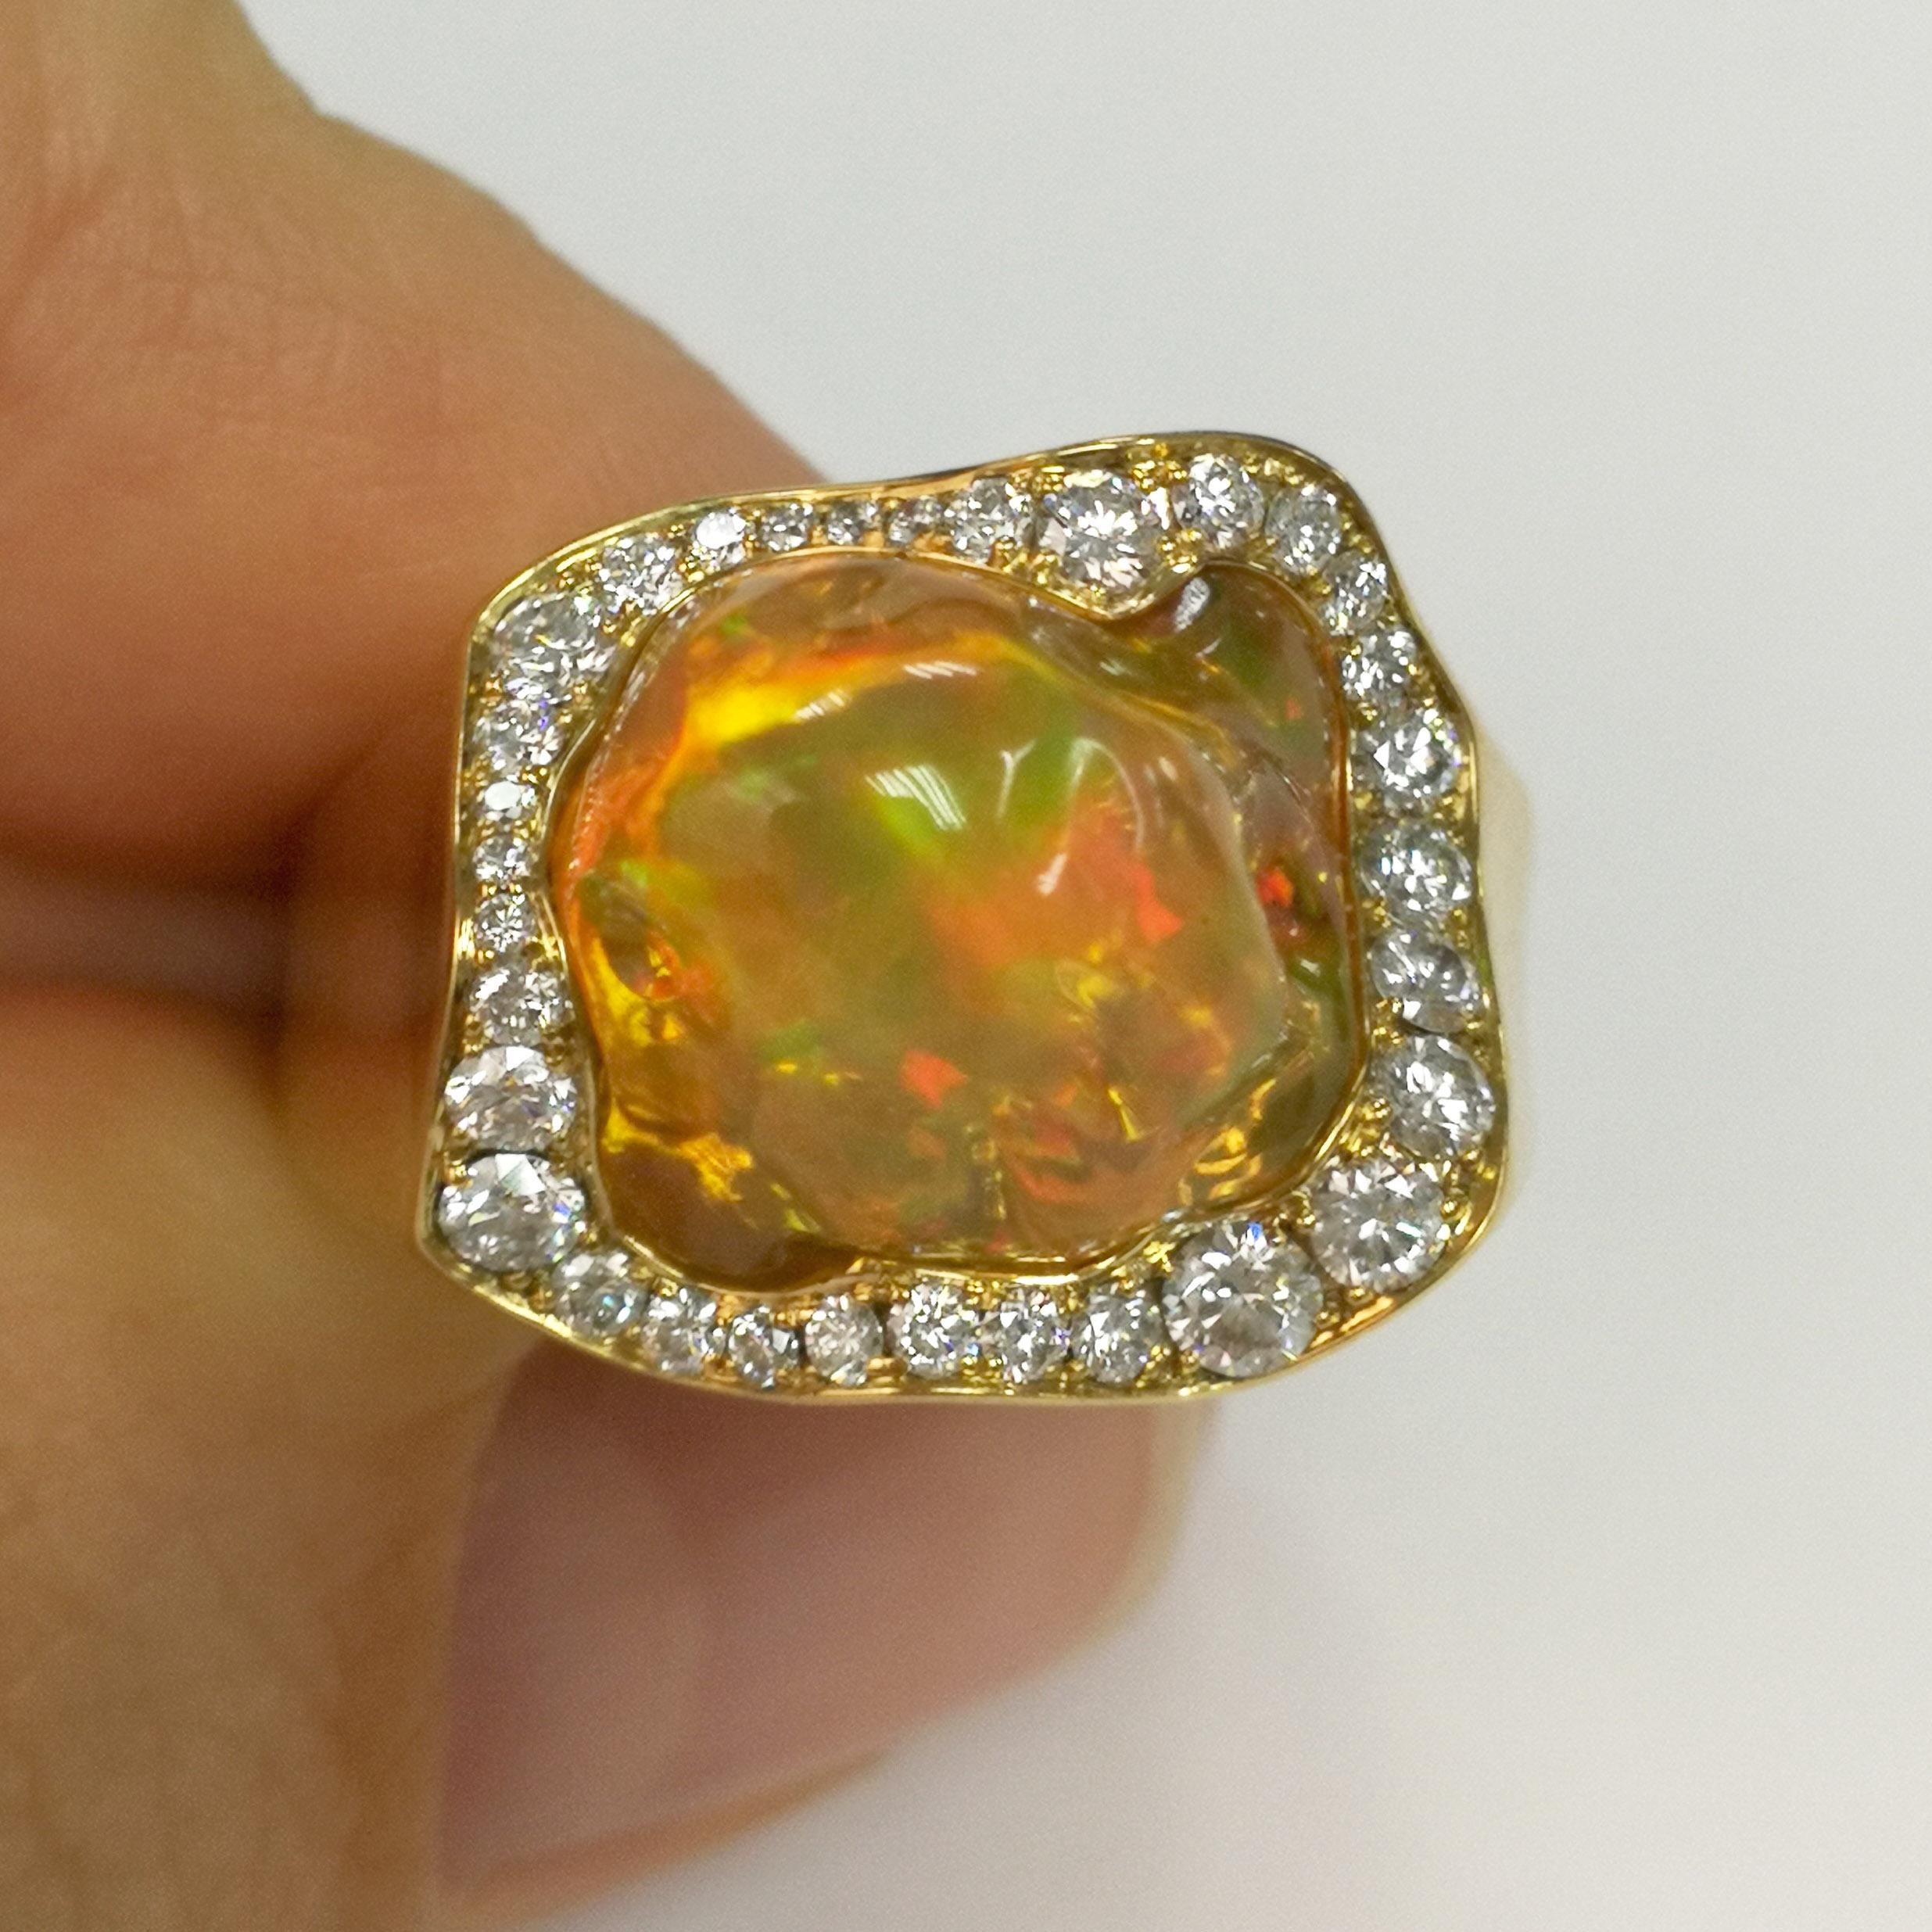 Mexican Opal 7.31 Carat Diamonds One of a Kind 18 Karat Yellow Gold Ring
Opals, unlike many other stones, are almost impossible to cut, they are always unique. Therefore, jewelry with Opals is always improvisation. It also happened with this Ring.